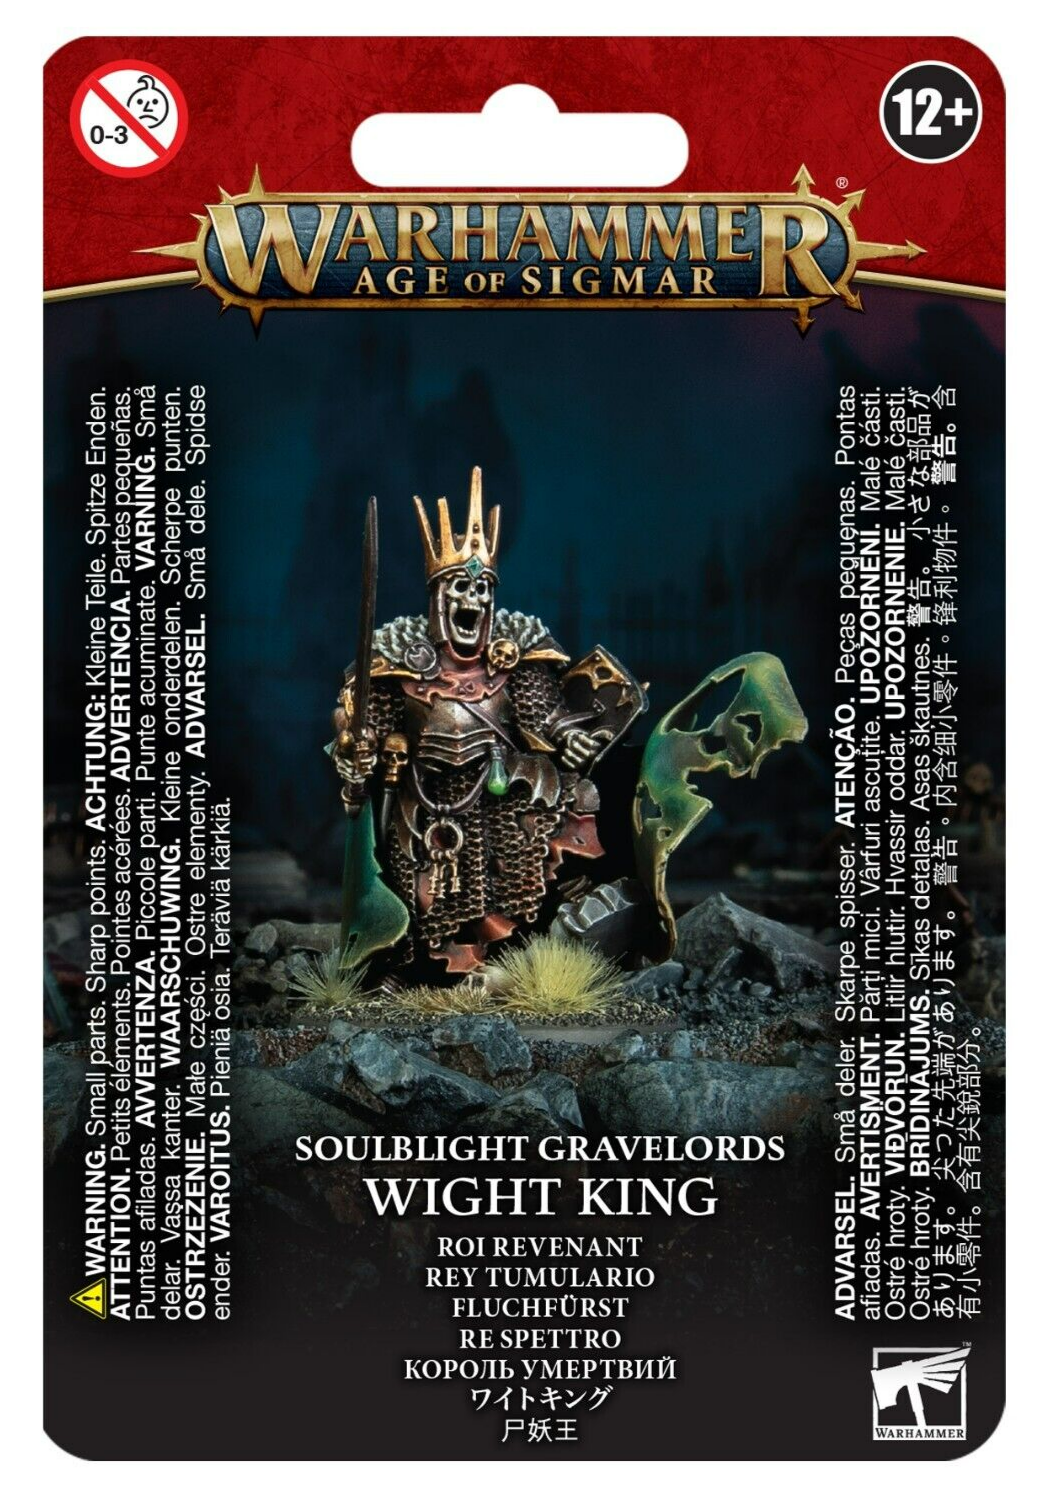 Wight King with Baleful Tomb Blade Soulblight Gravelords Warhammer AoS WBGames